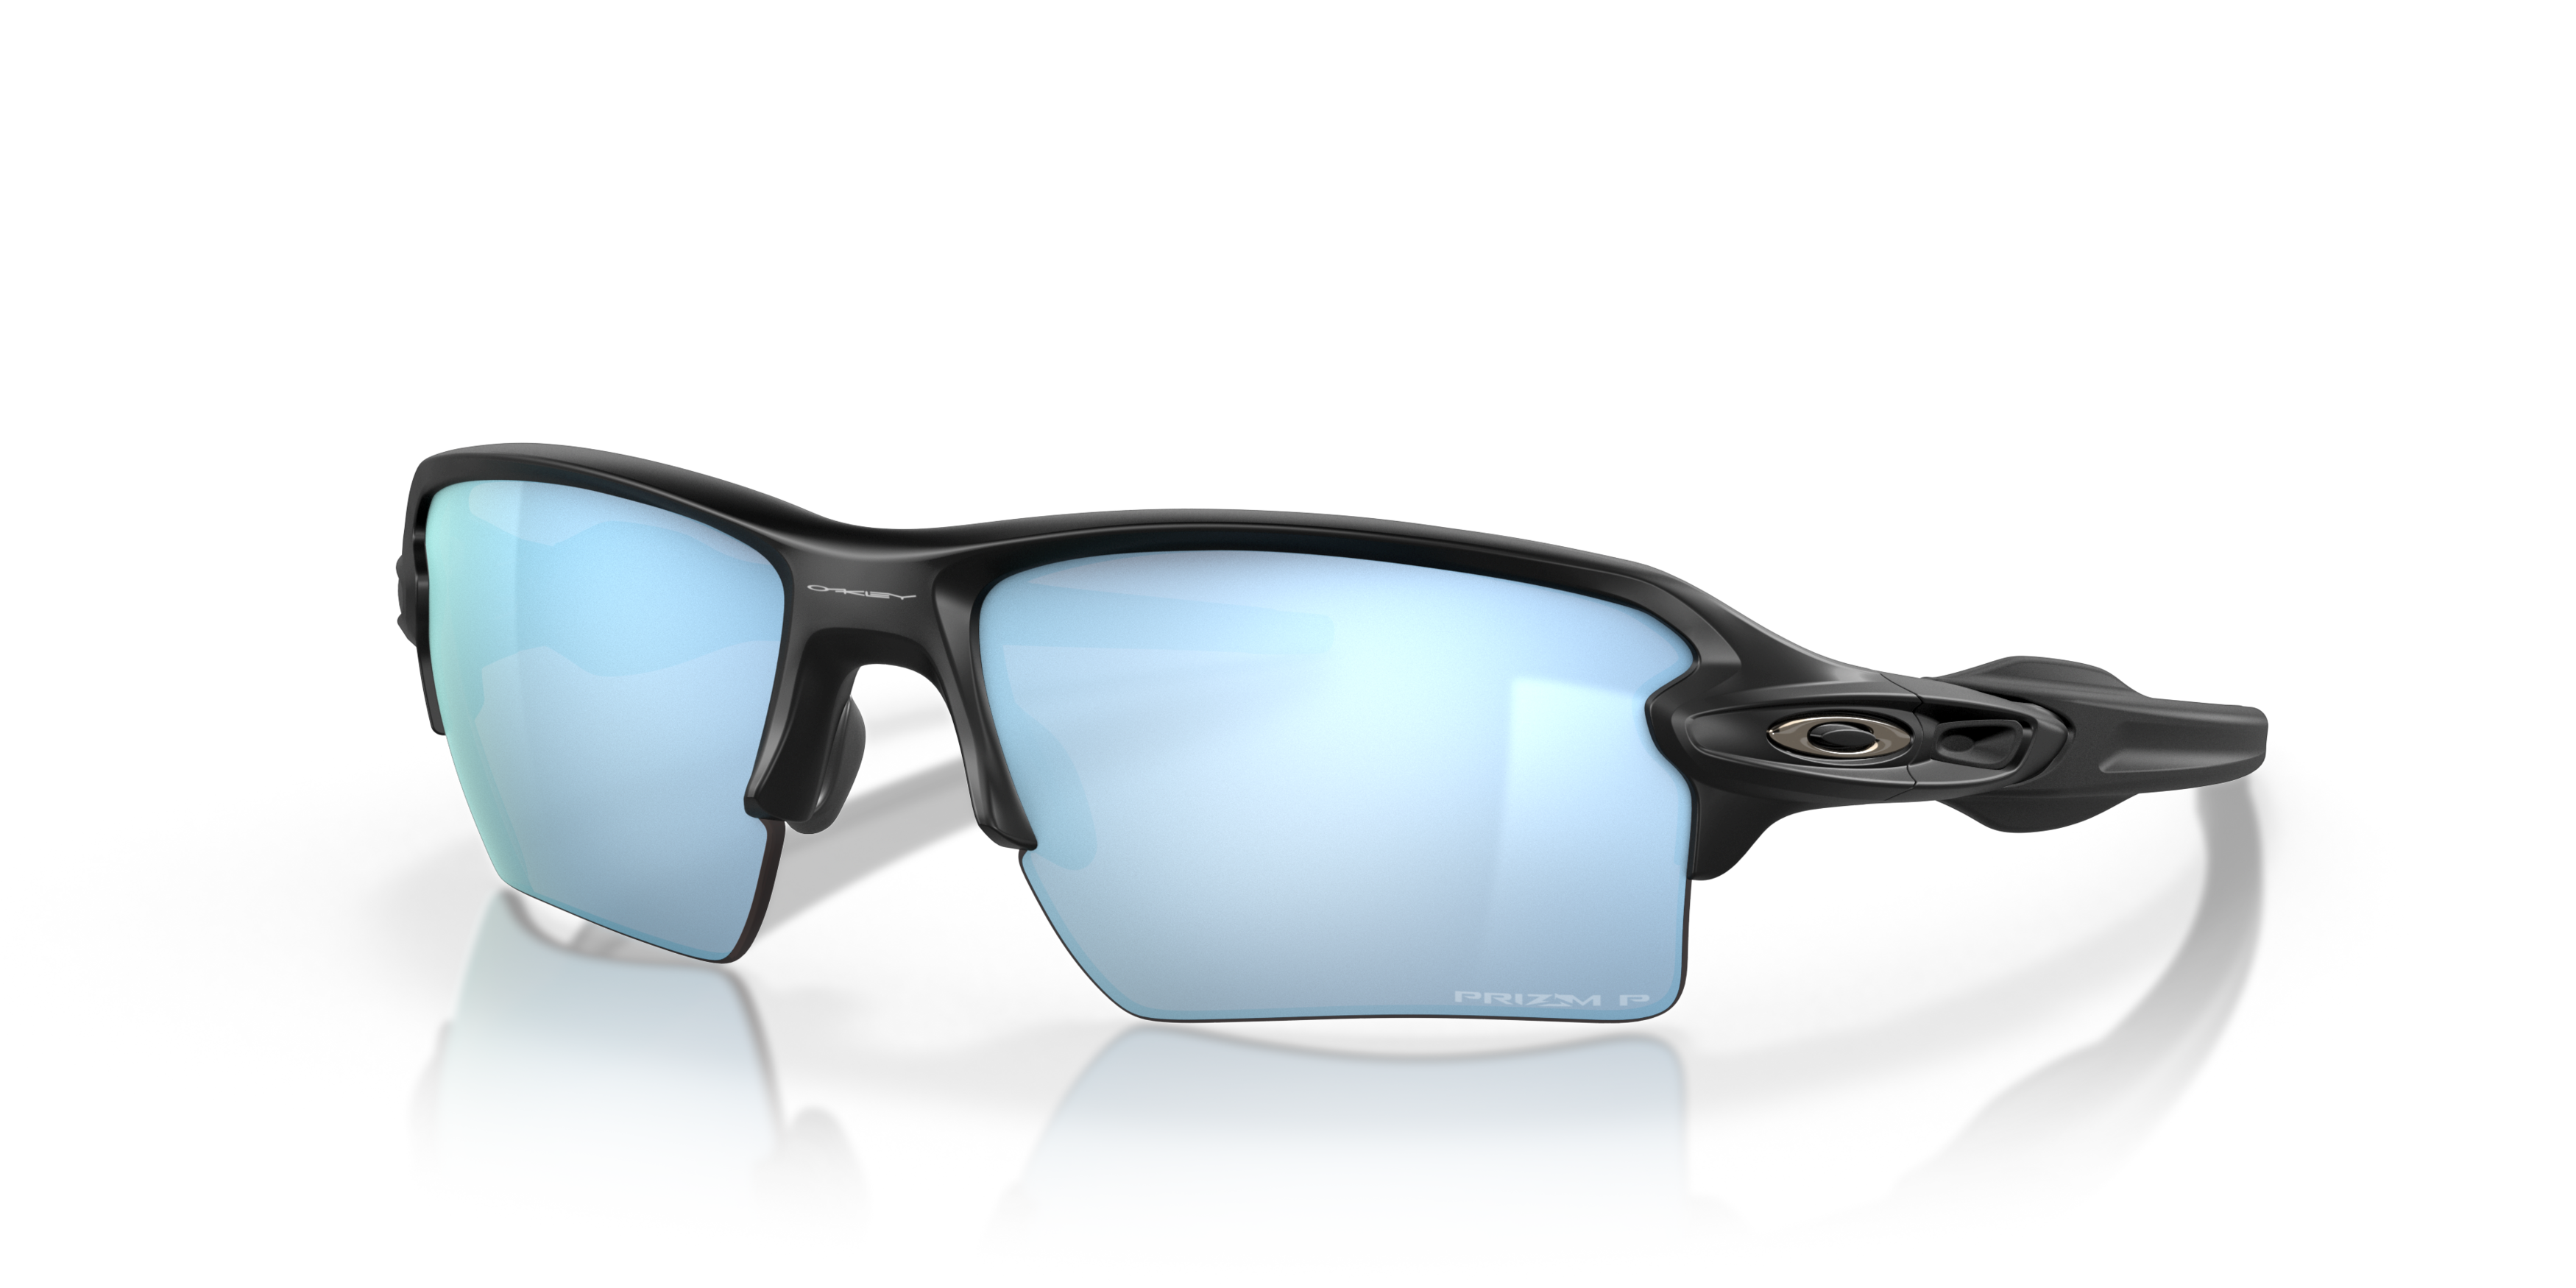 [products.image.angle_left01] Oakley FLAK 2.0 XL OO9188 918858